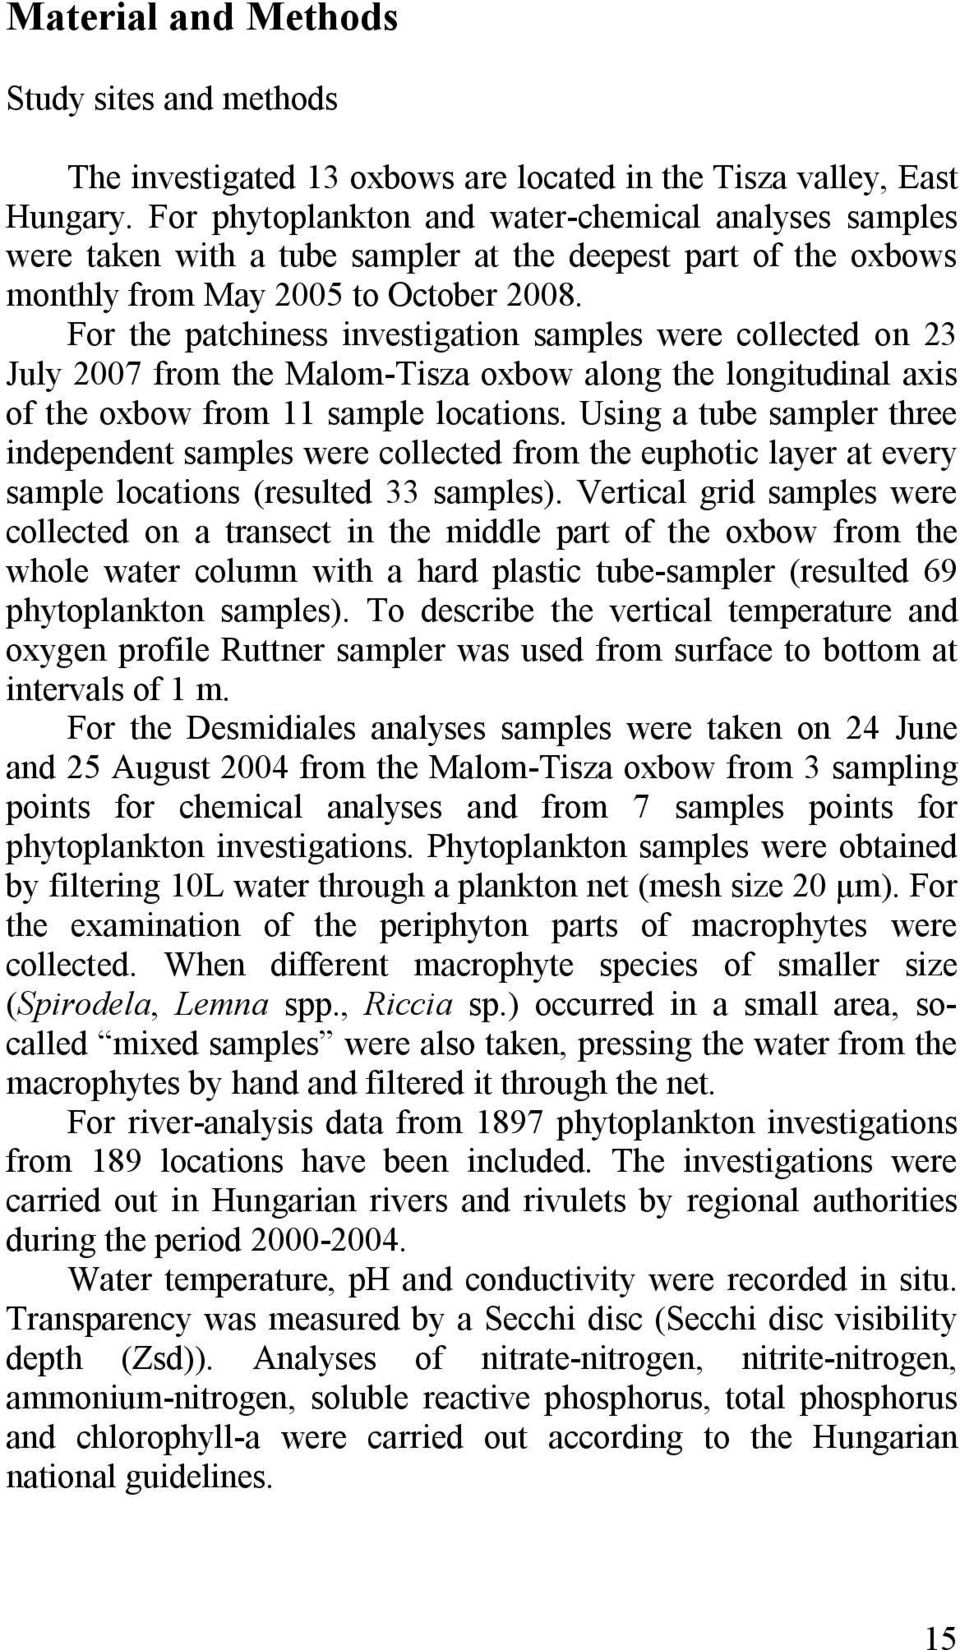 For the patchiness investigation samples were collected on 23 July 2007 from the Malom-Tisza oxbow along the longitudinal axis of the oxbow from 11 sample locations.